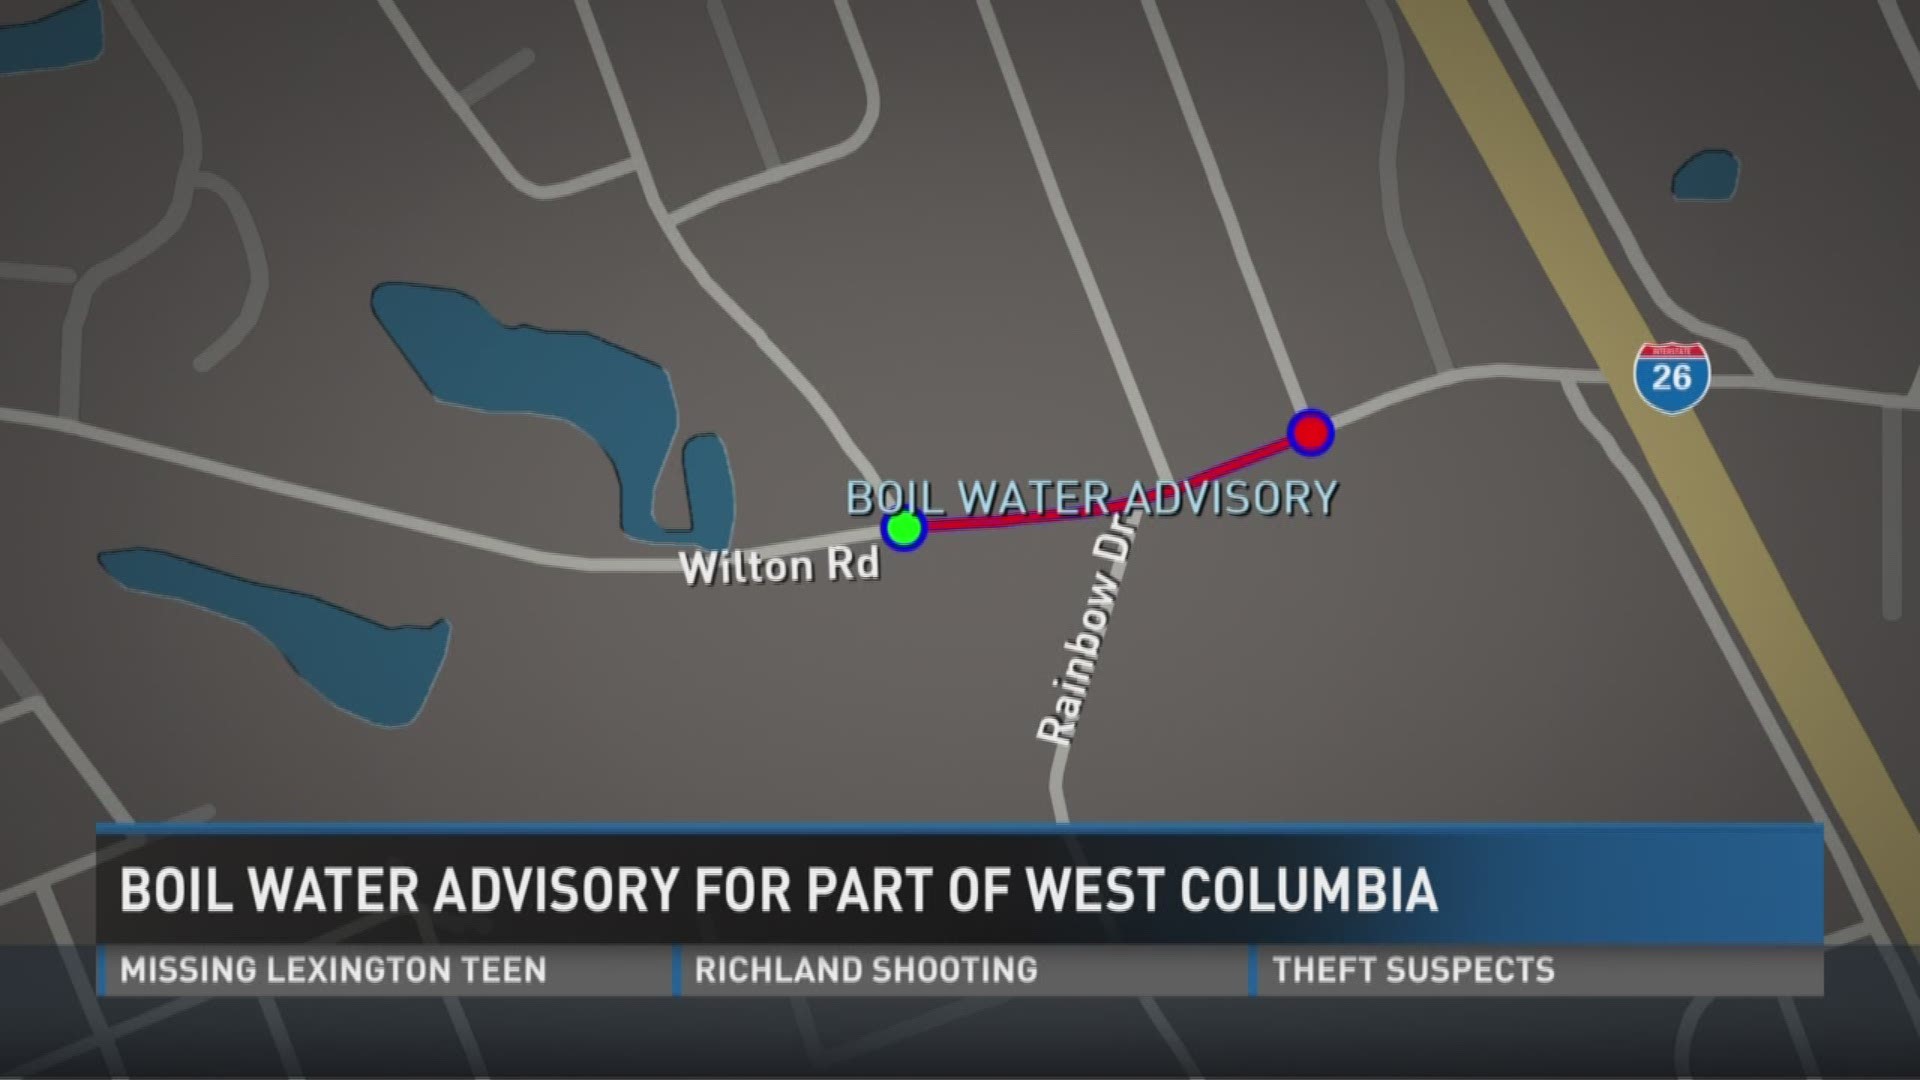 The City of West Columbia has issued a Boil Water Advisory.